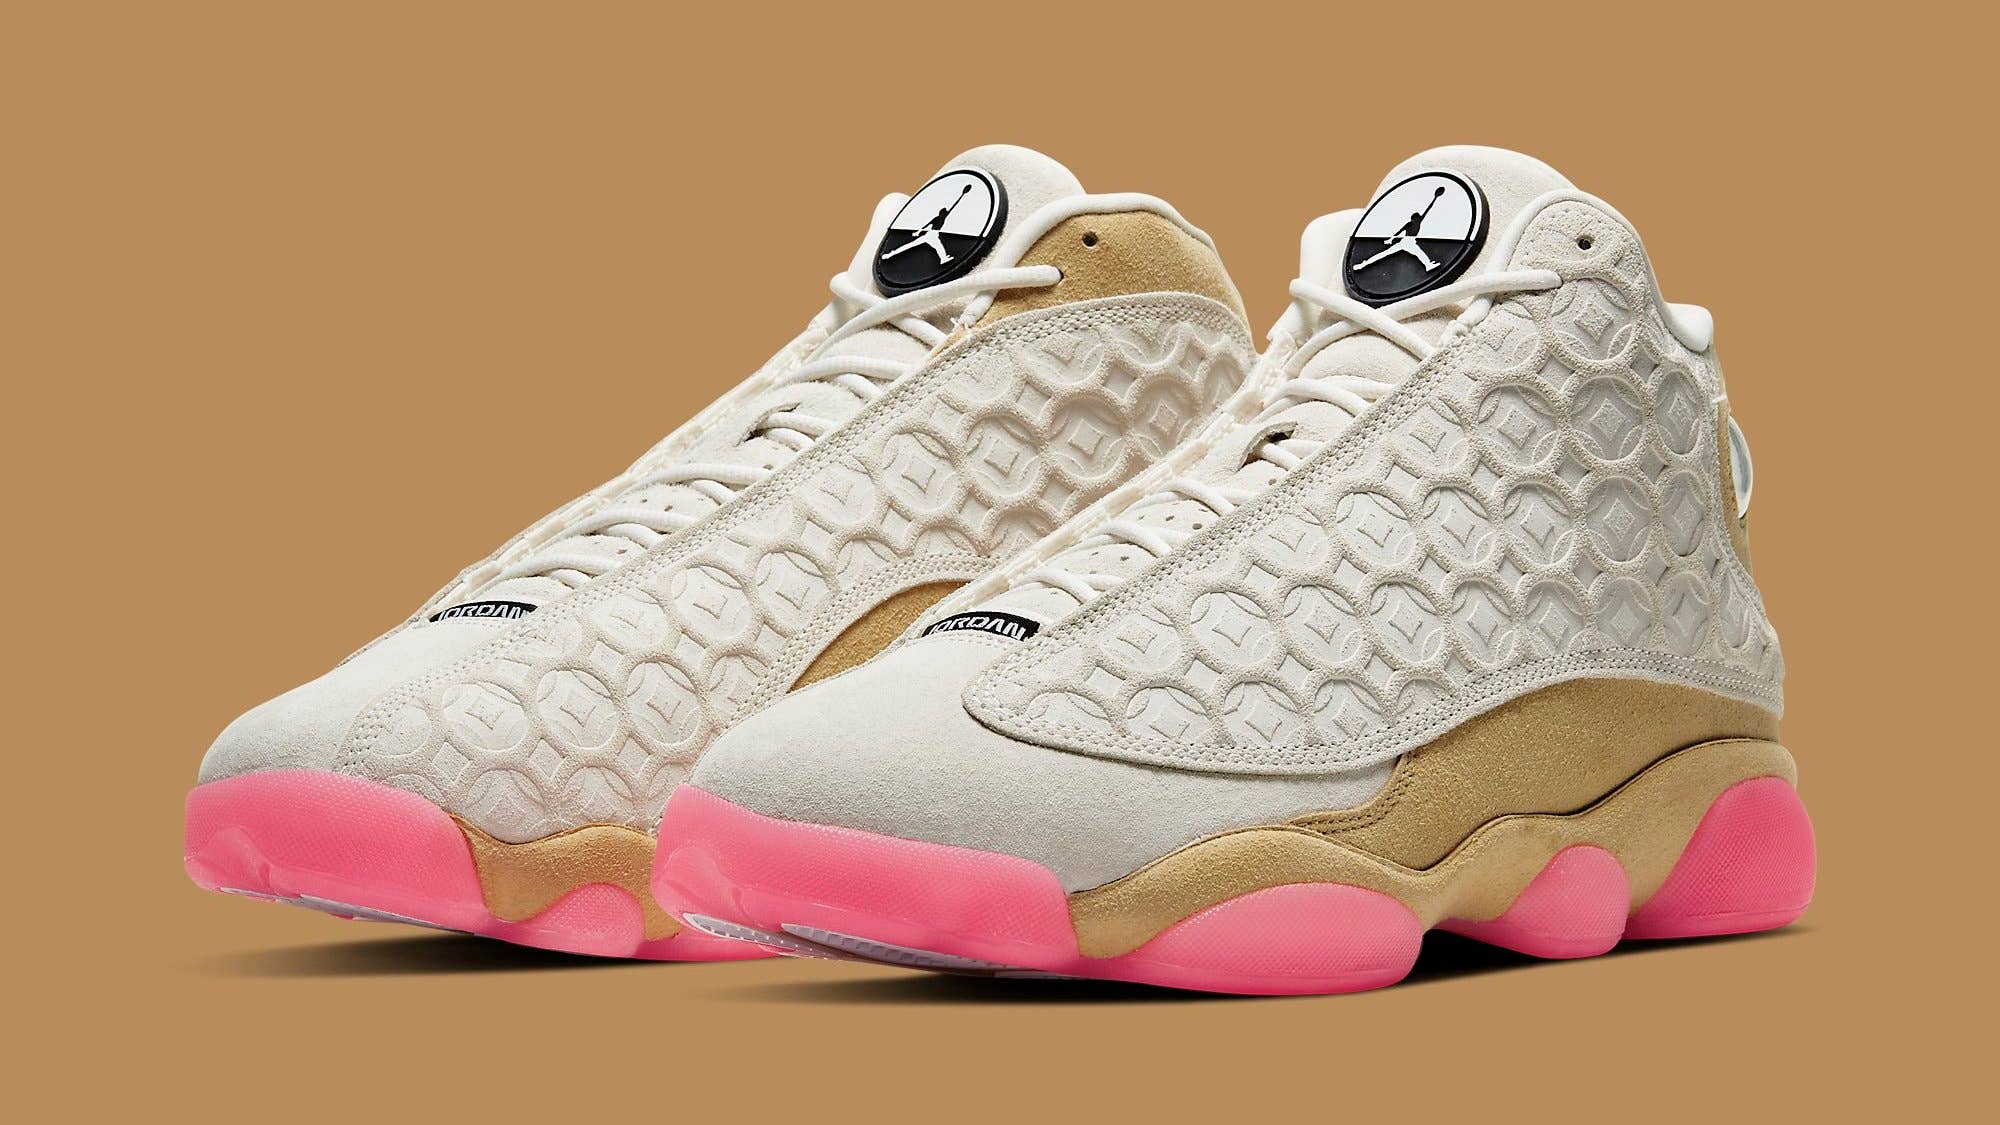 New Air Jordan 13 Is to Celebrate Chinese New Year | Complex